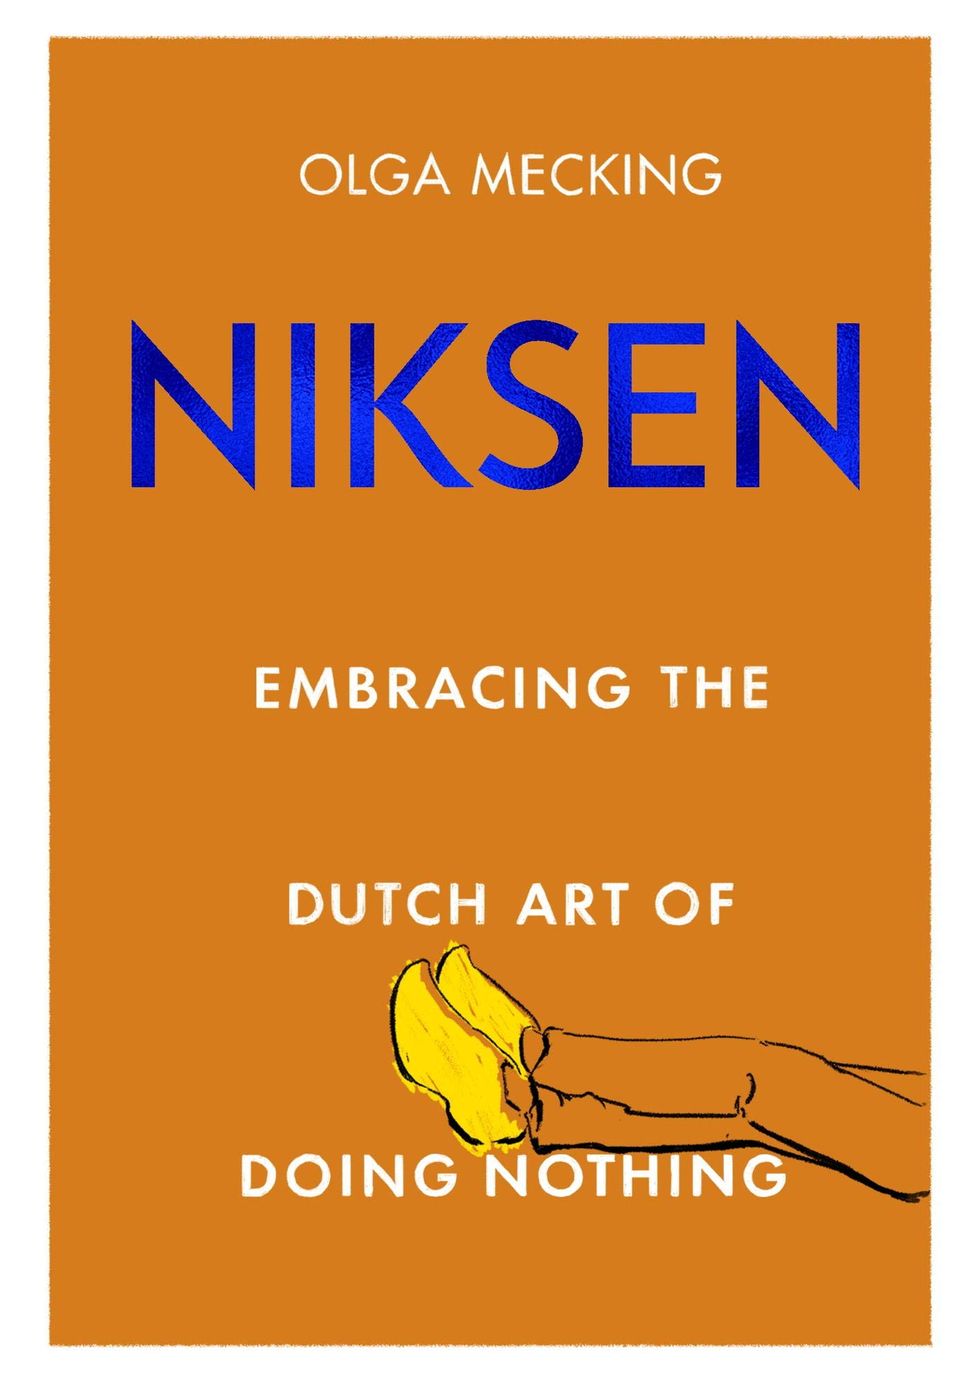 Niksen: Embracing the Dutch Art of Doing Nothing (English Edition)